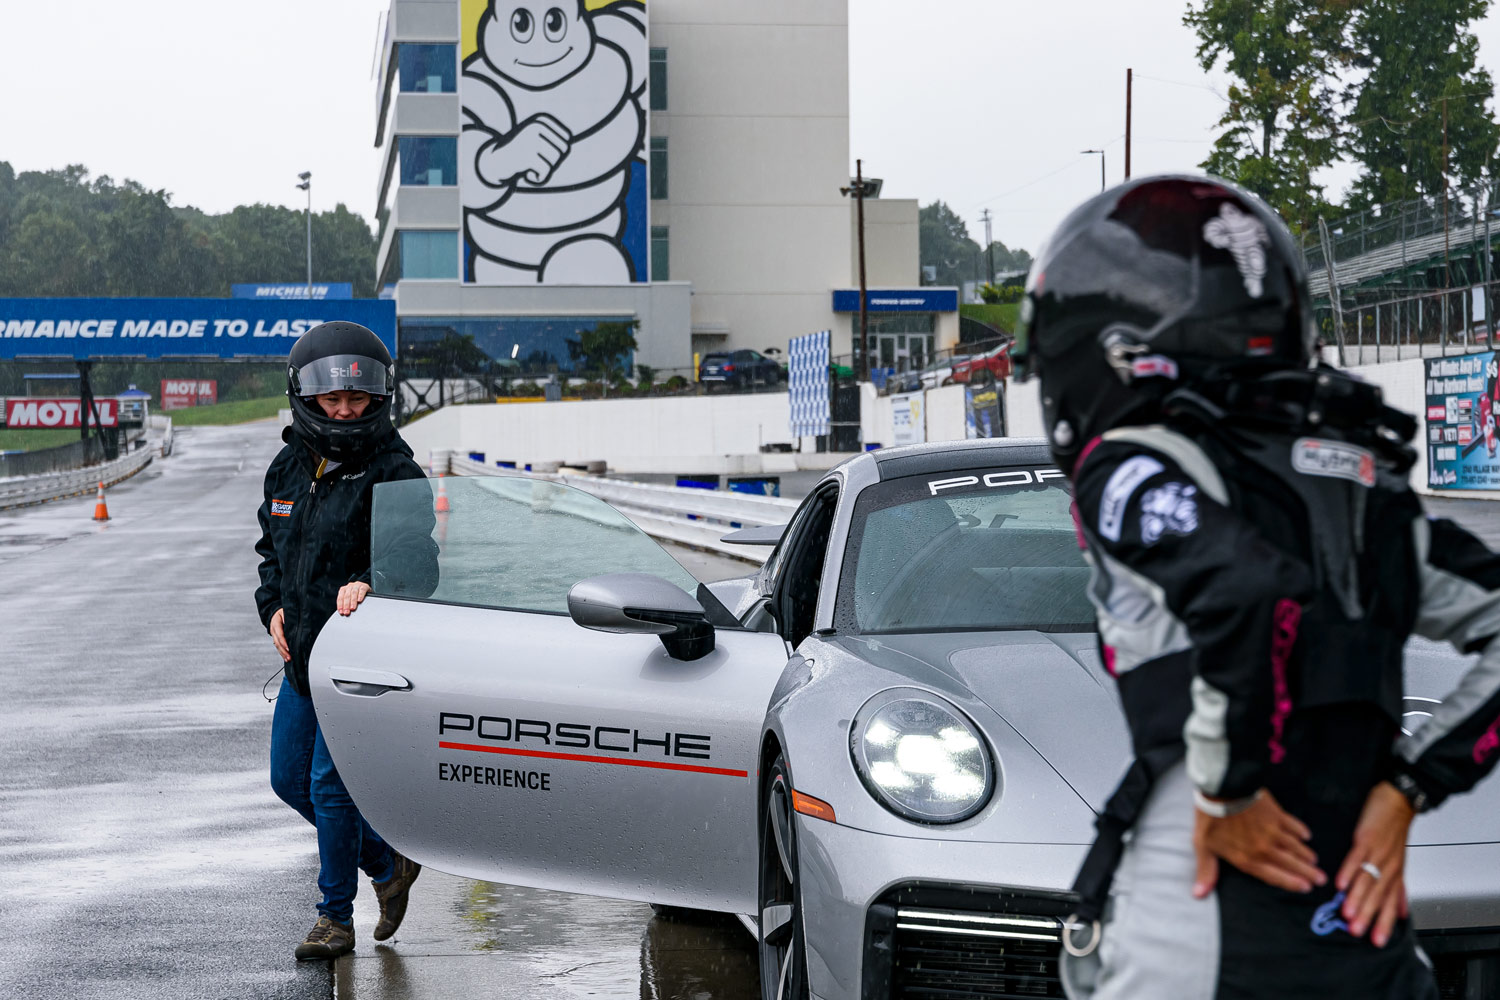 Two people wearing helmets preparing to enter a silver Porsche.